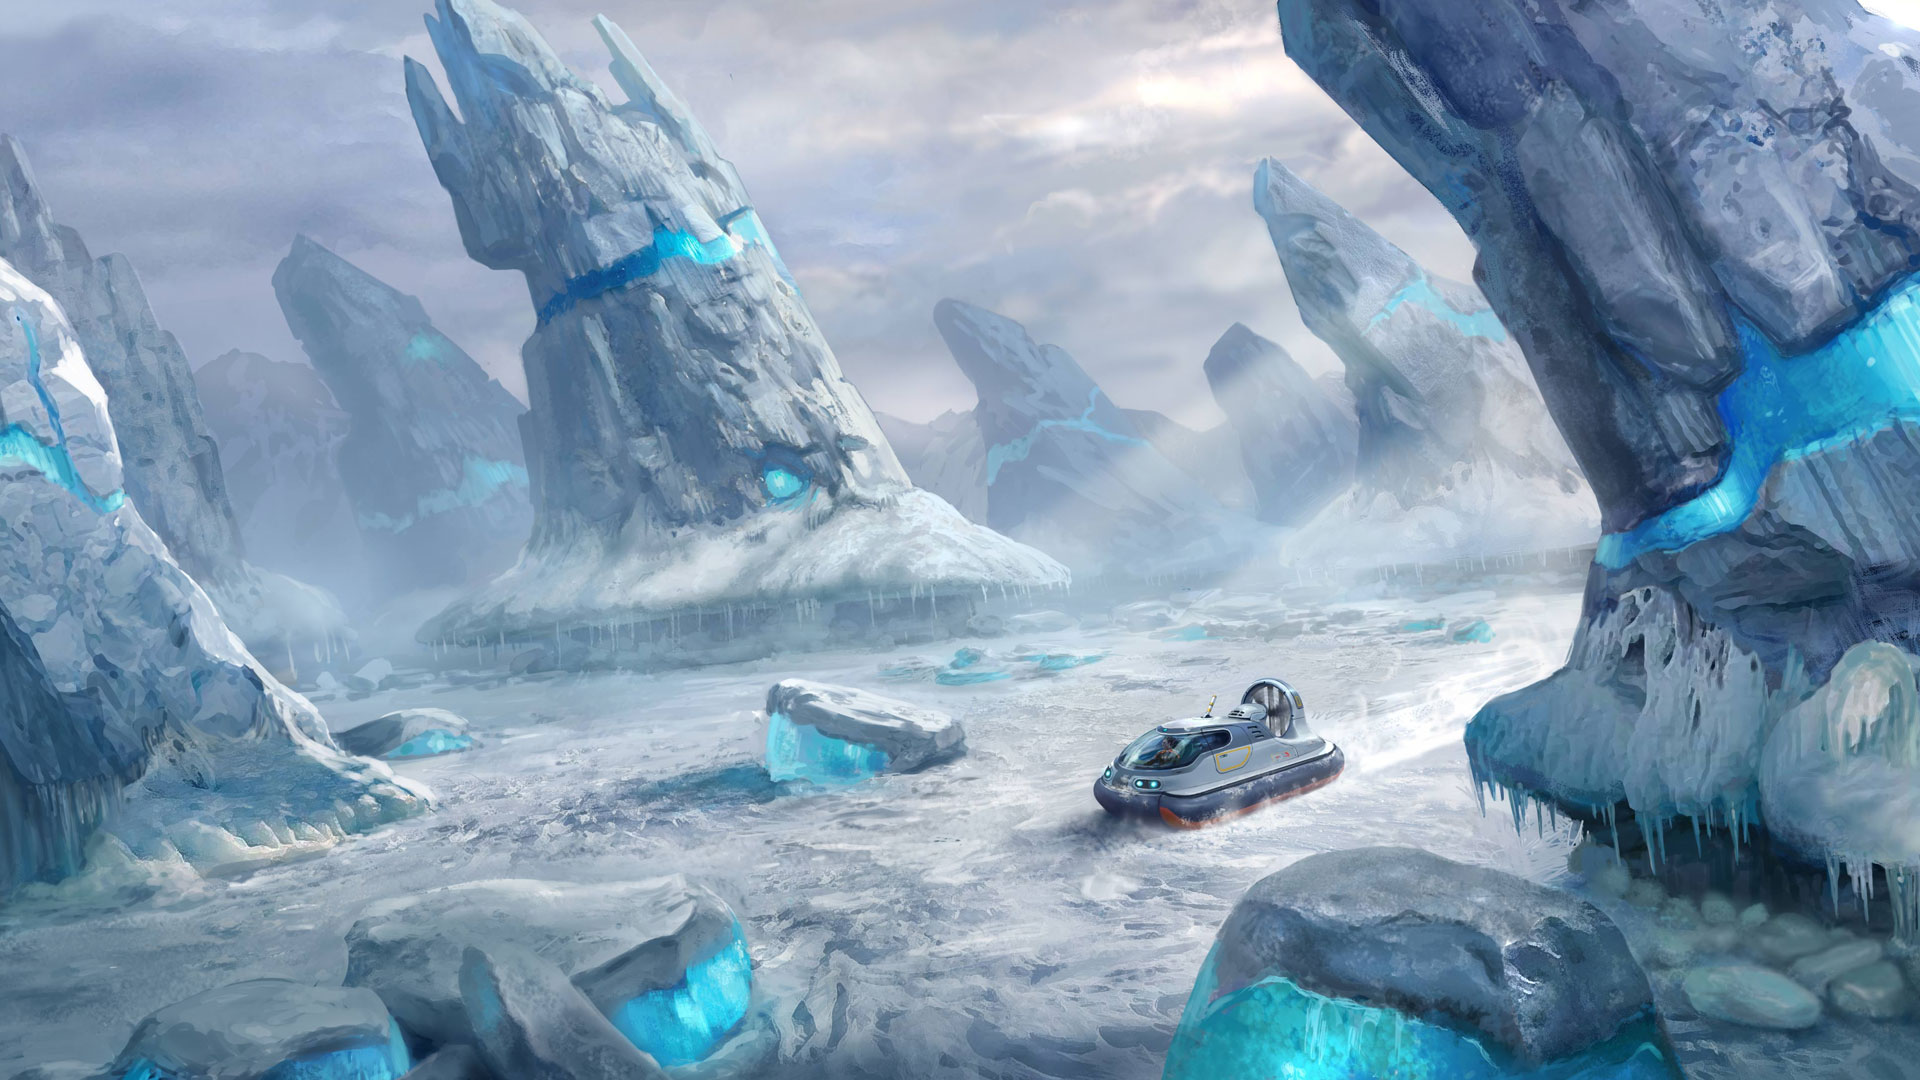 There's Also A Few 3d Renderings Of Creatures You May - Subnautica Below Zero Release , HD Wallpaper & Backgrounds